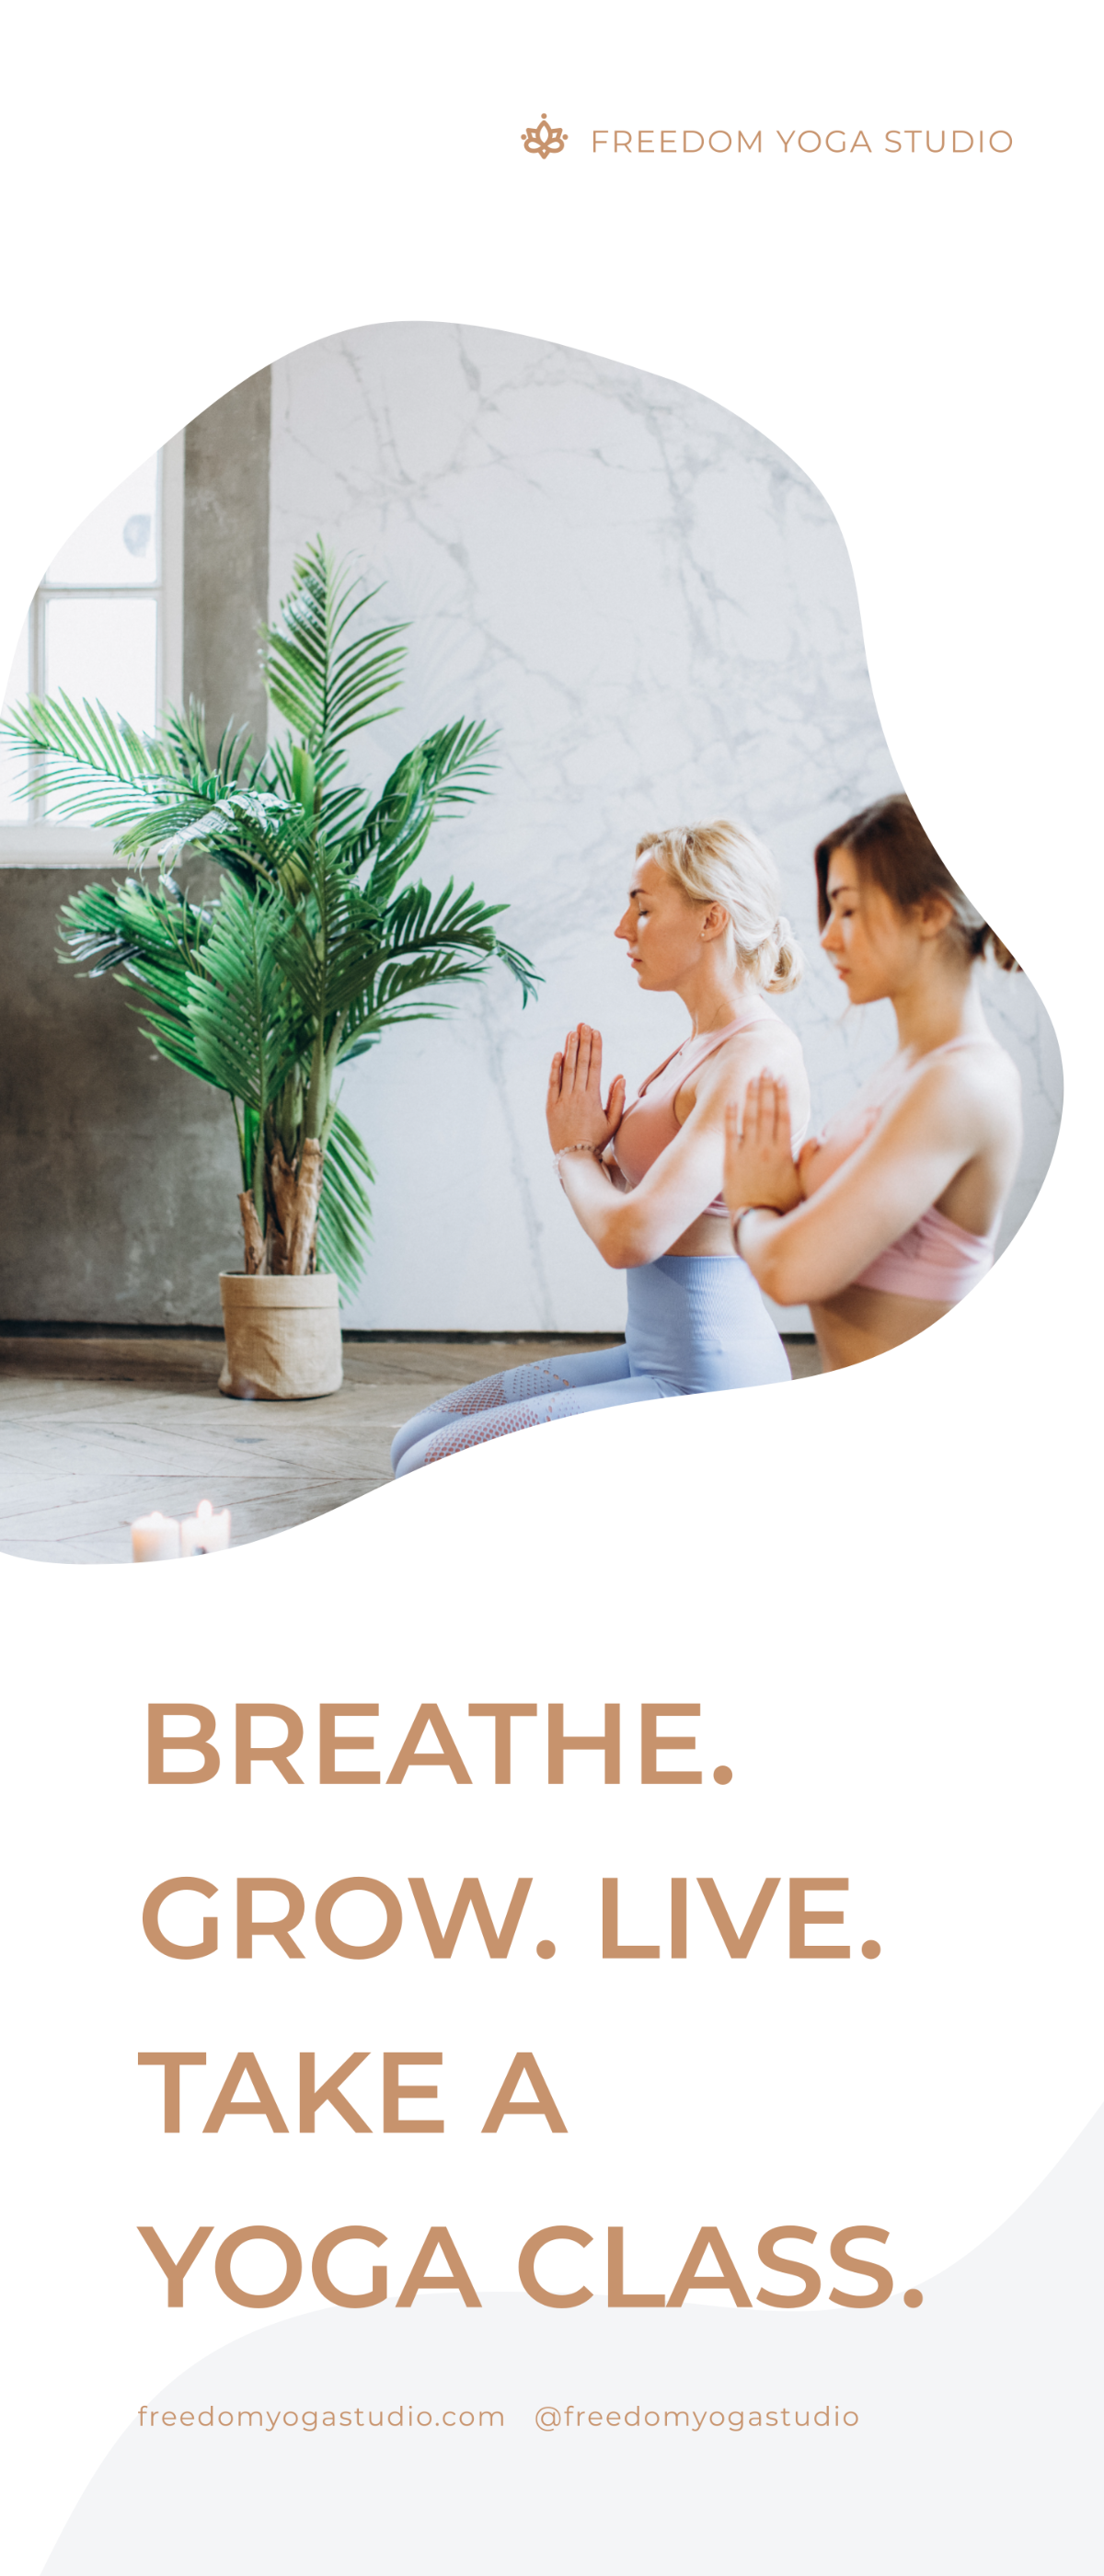 Free Yoga Class Roll Up Banner Template